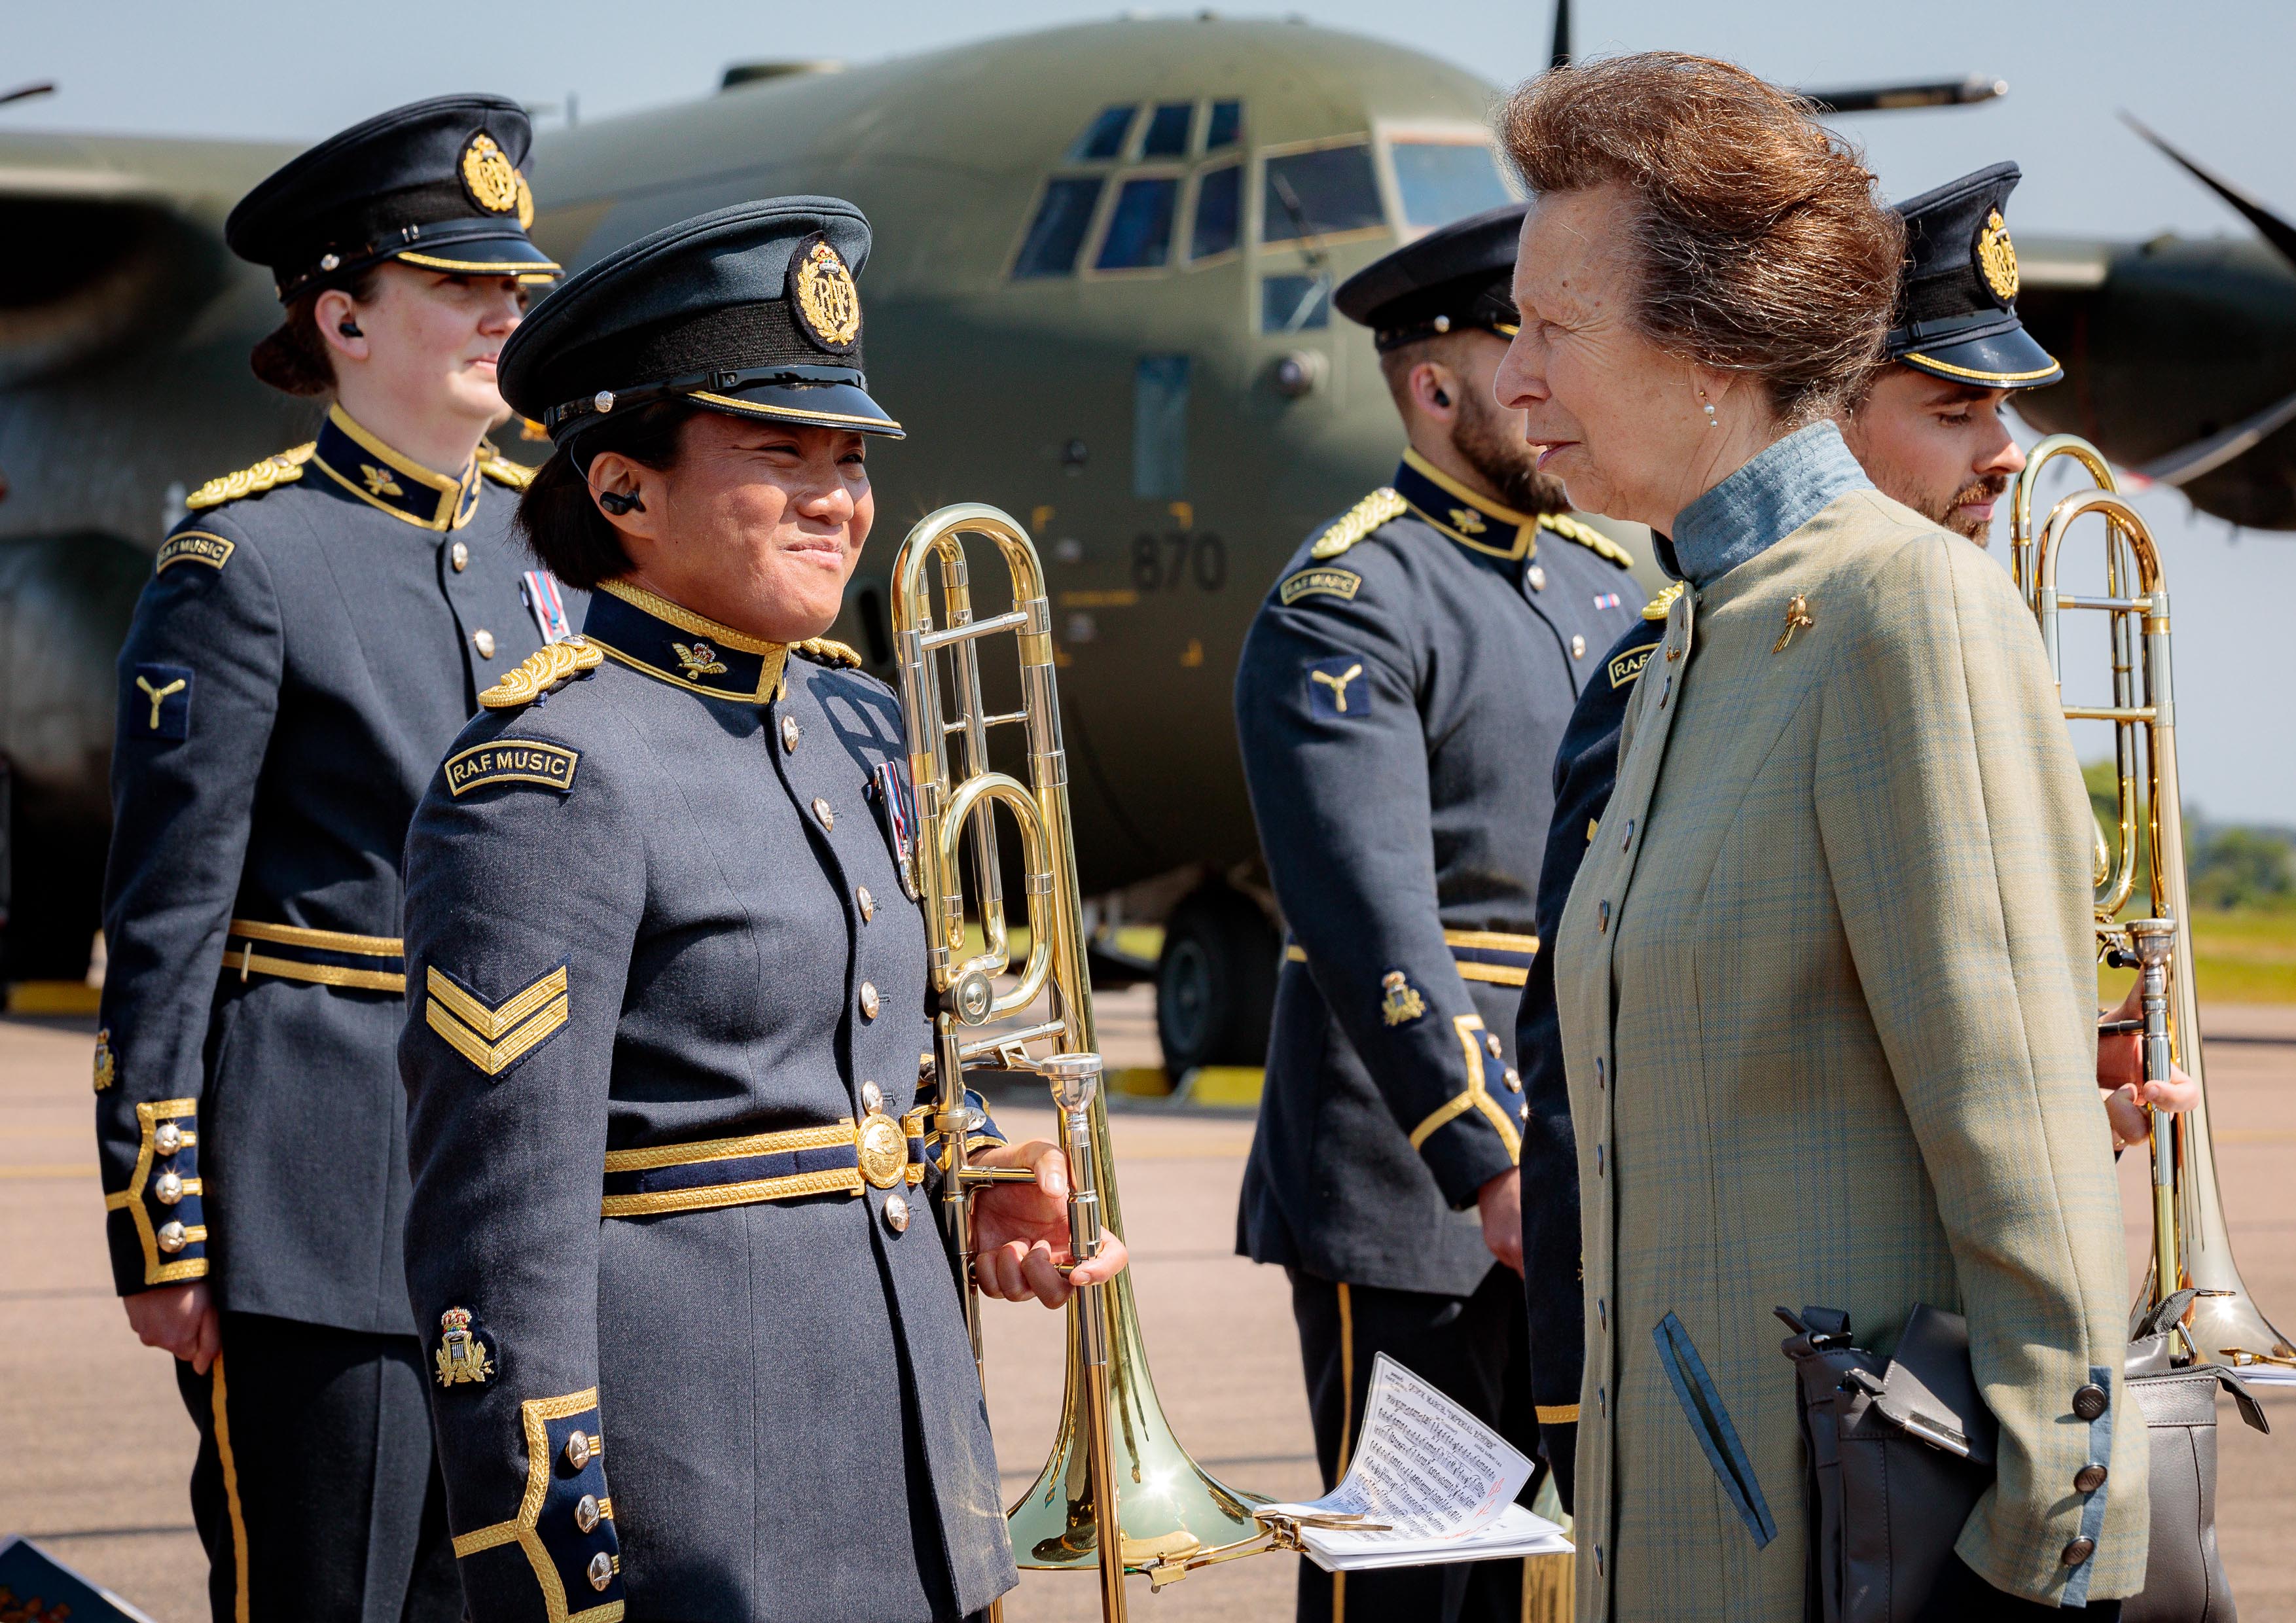 HRH and The Central Band of the RAF